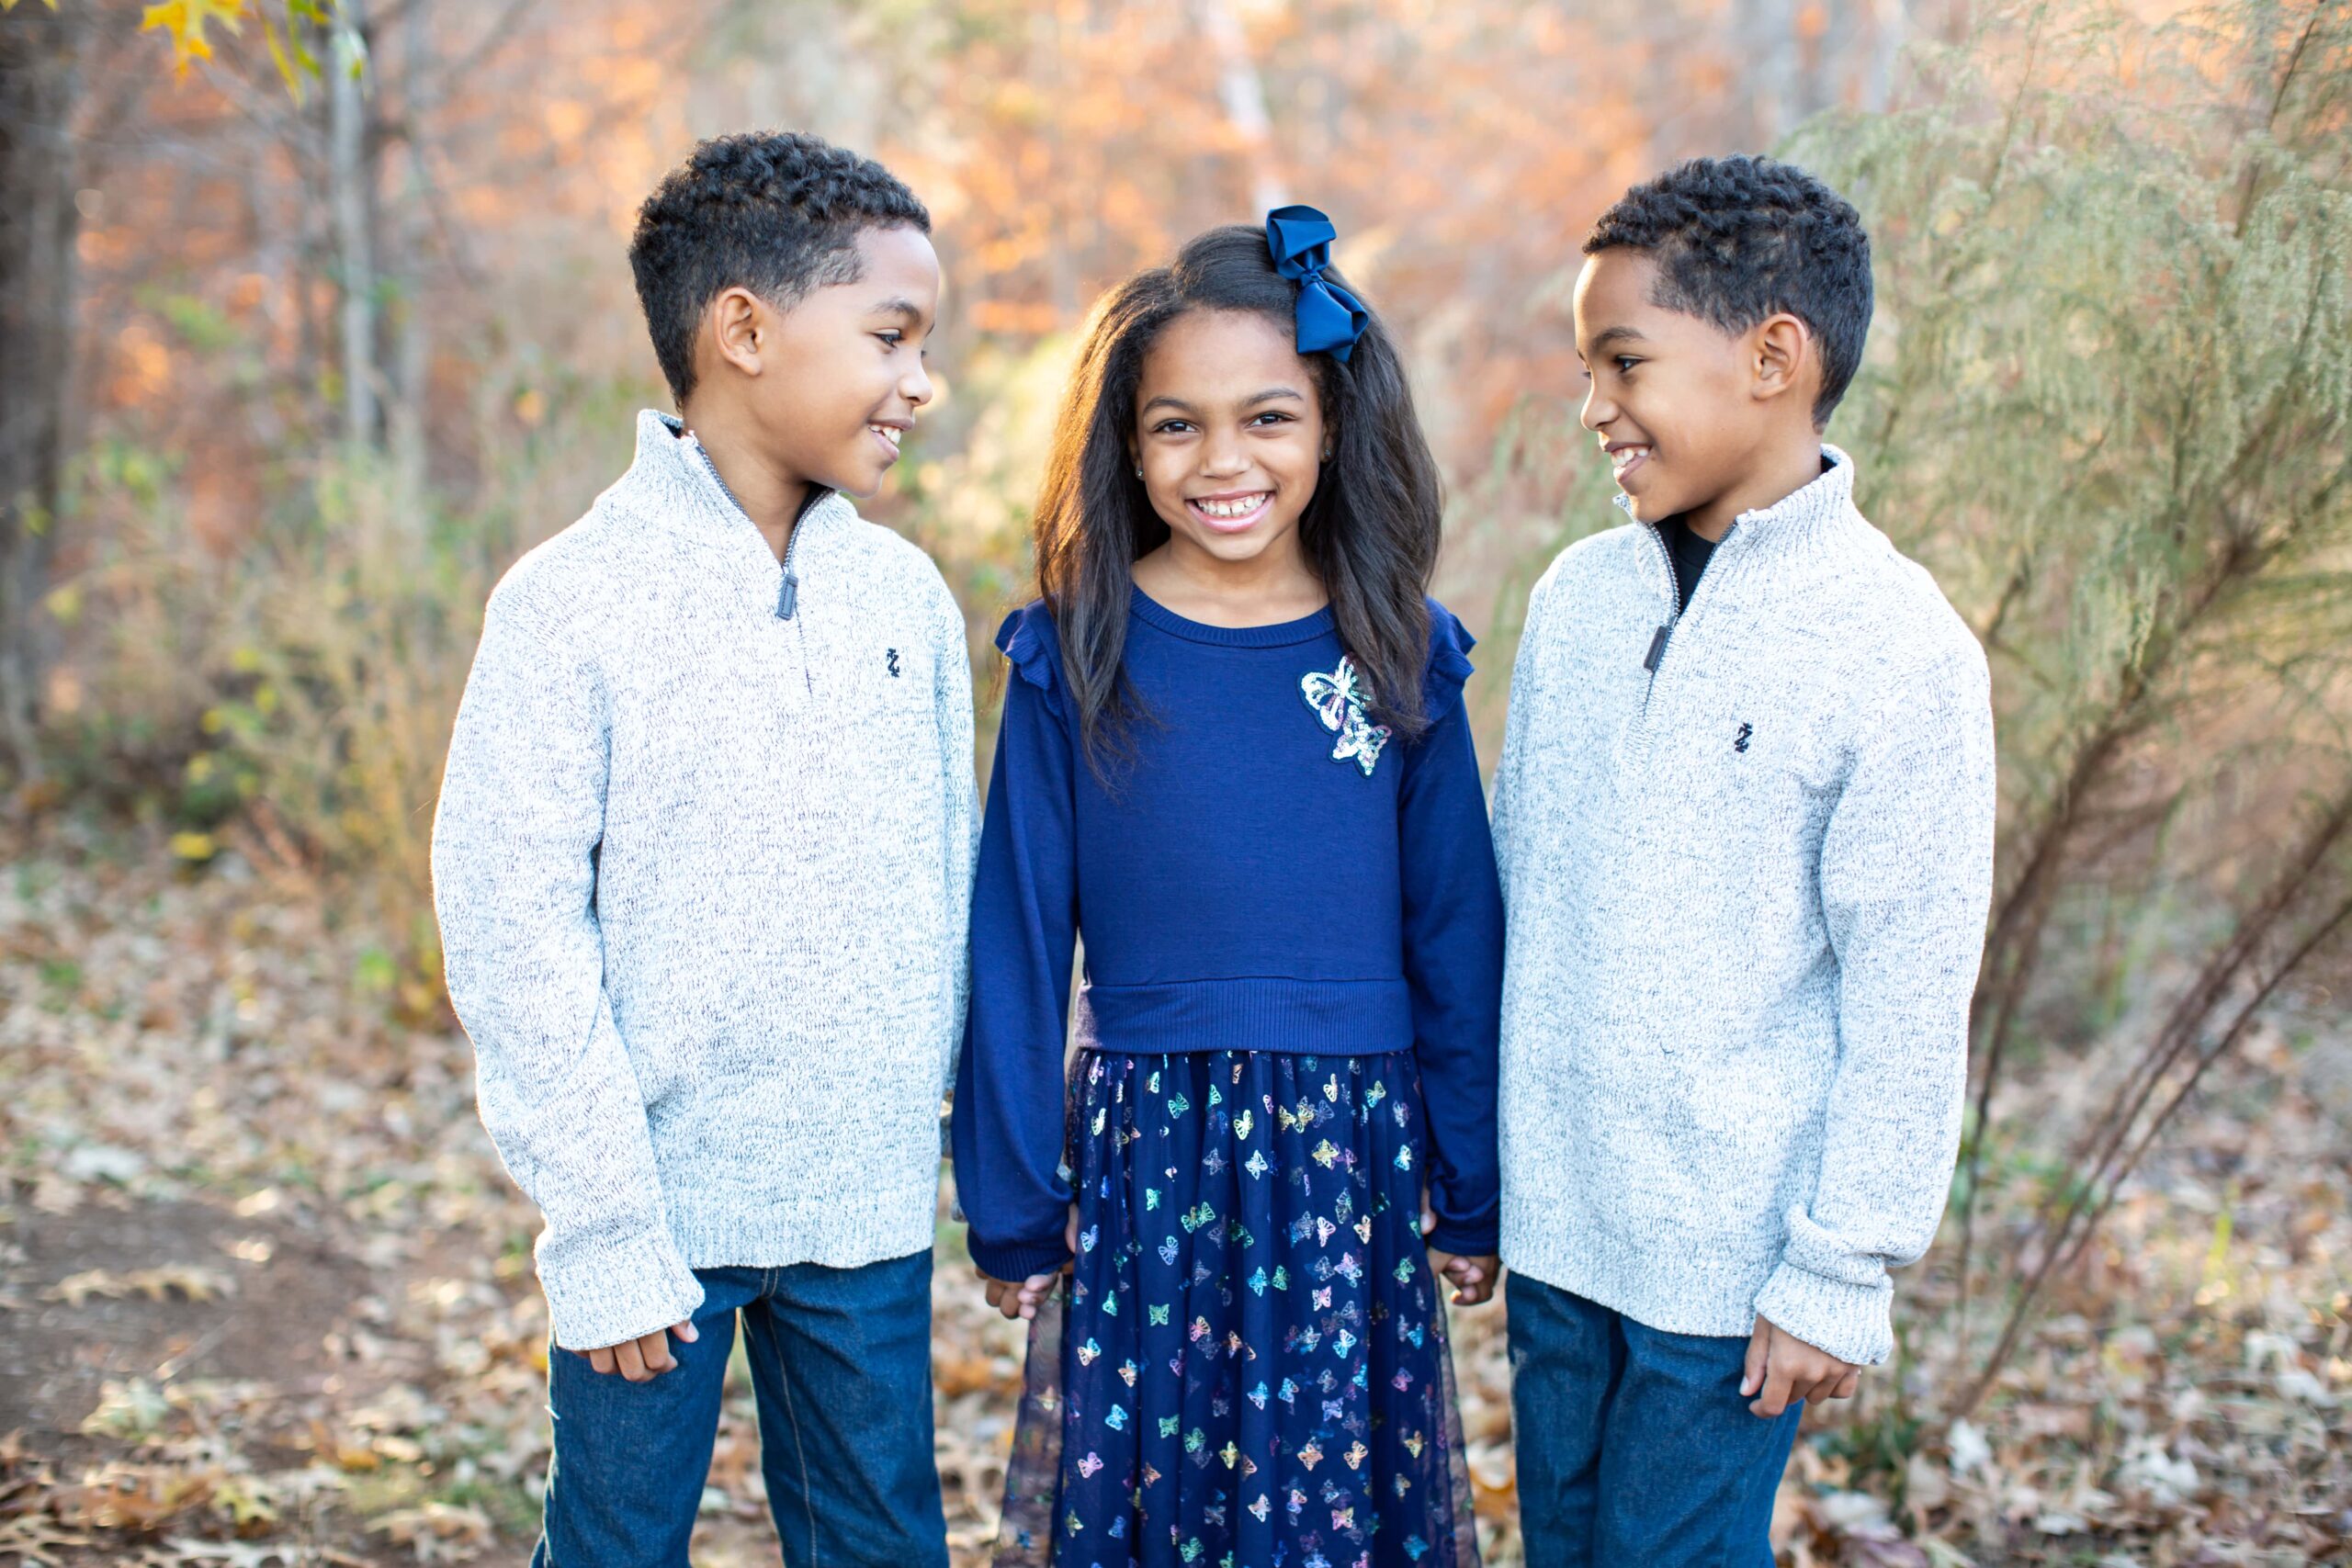 triplets during fall portraits in Raleigh, NC captured by Magdalena Stefanek Photography, Raleigh family photographer.